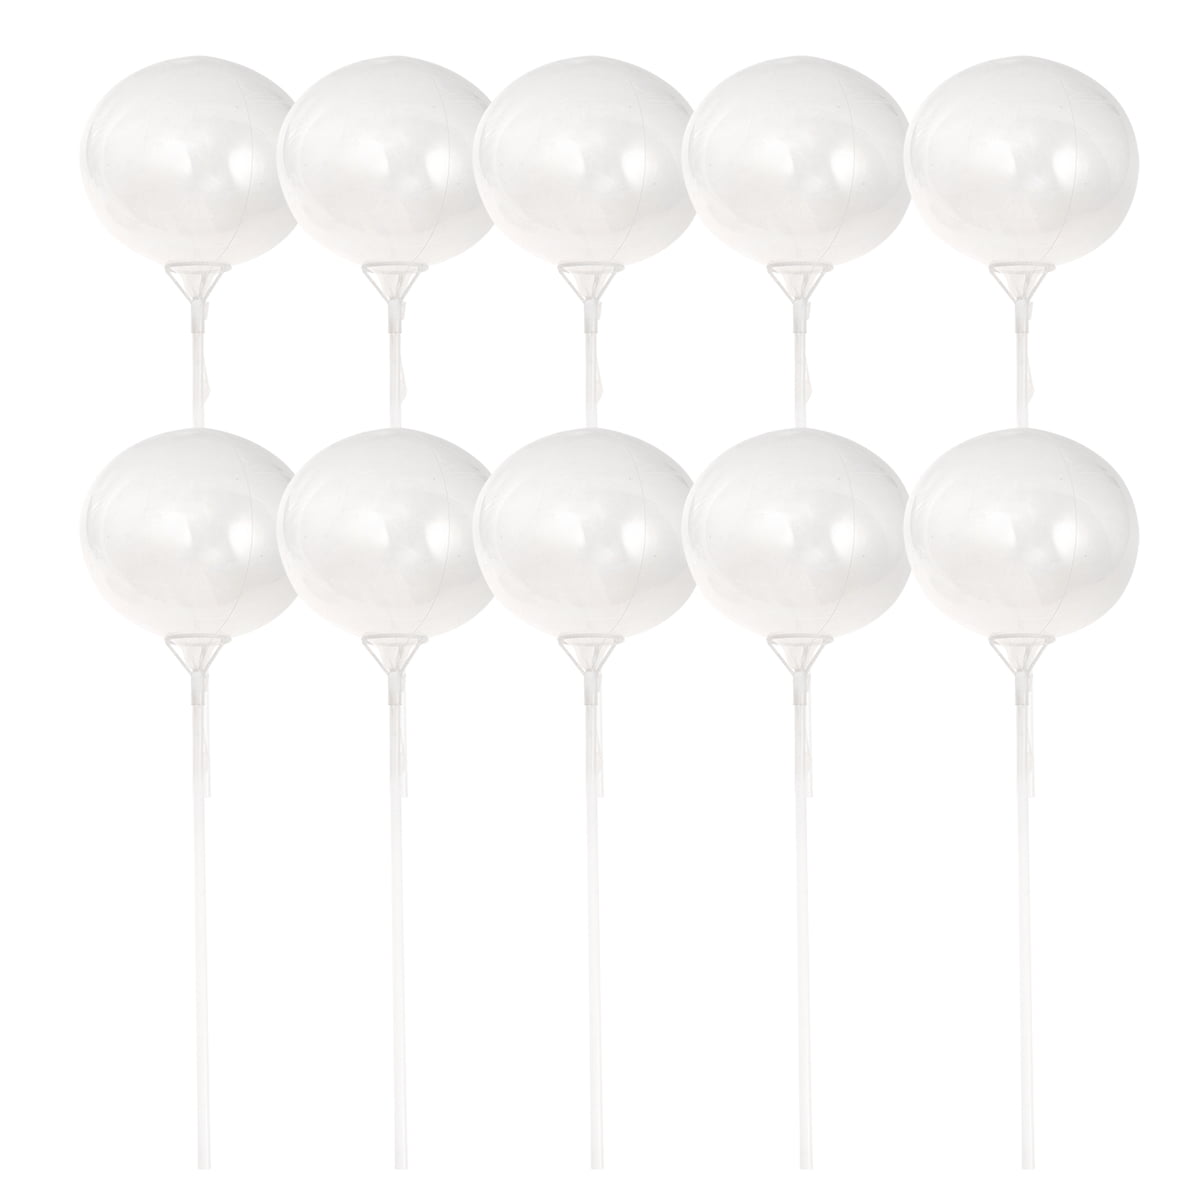 Large Clear Balloons for Stuffing, 12PCS 26 Inch Fillable Big